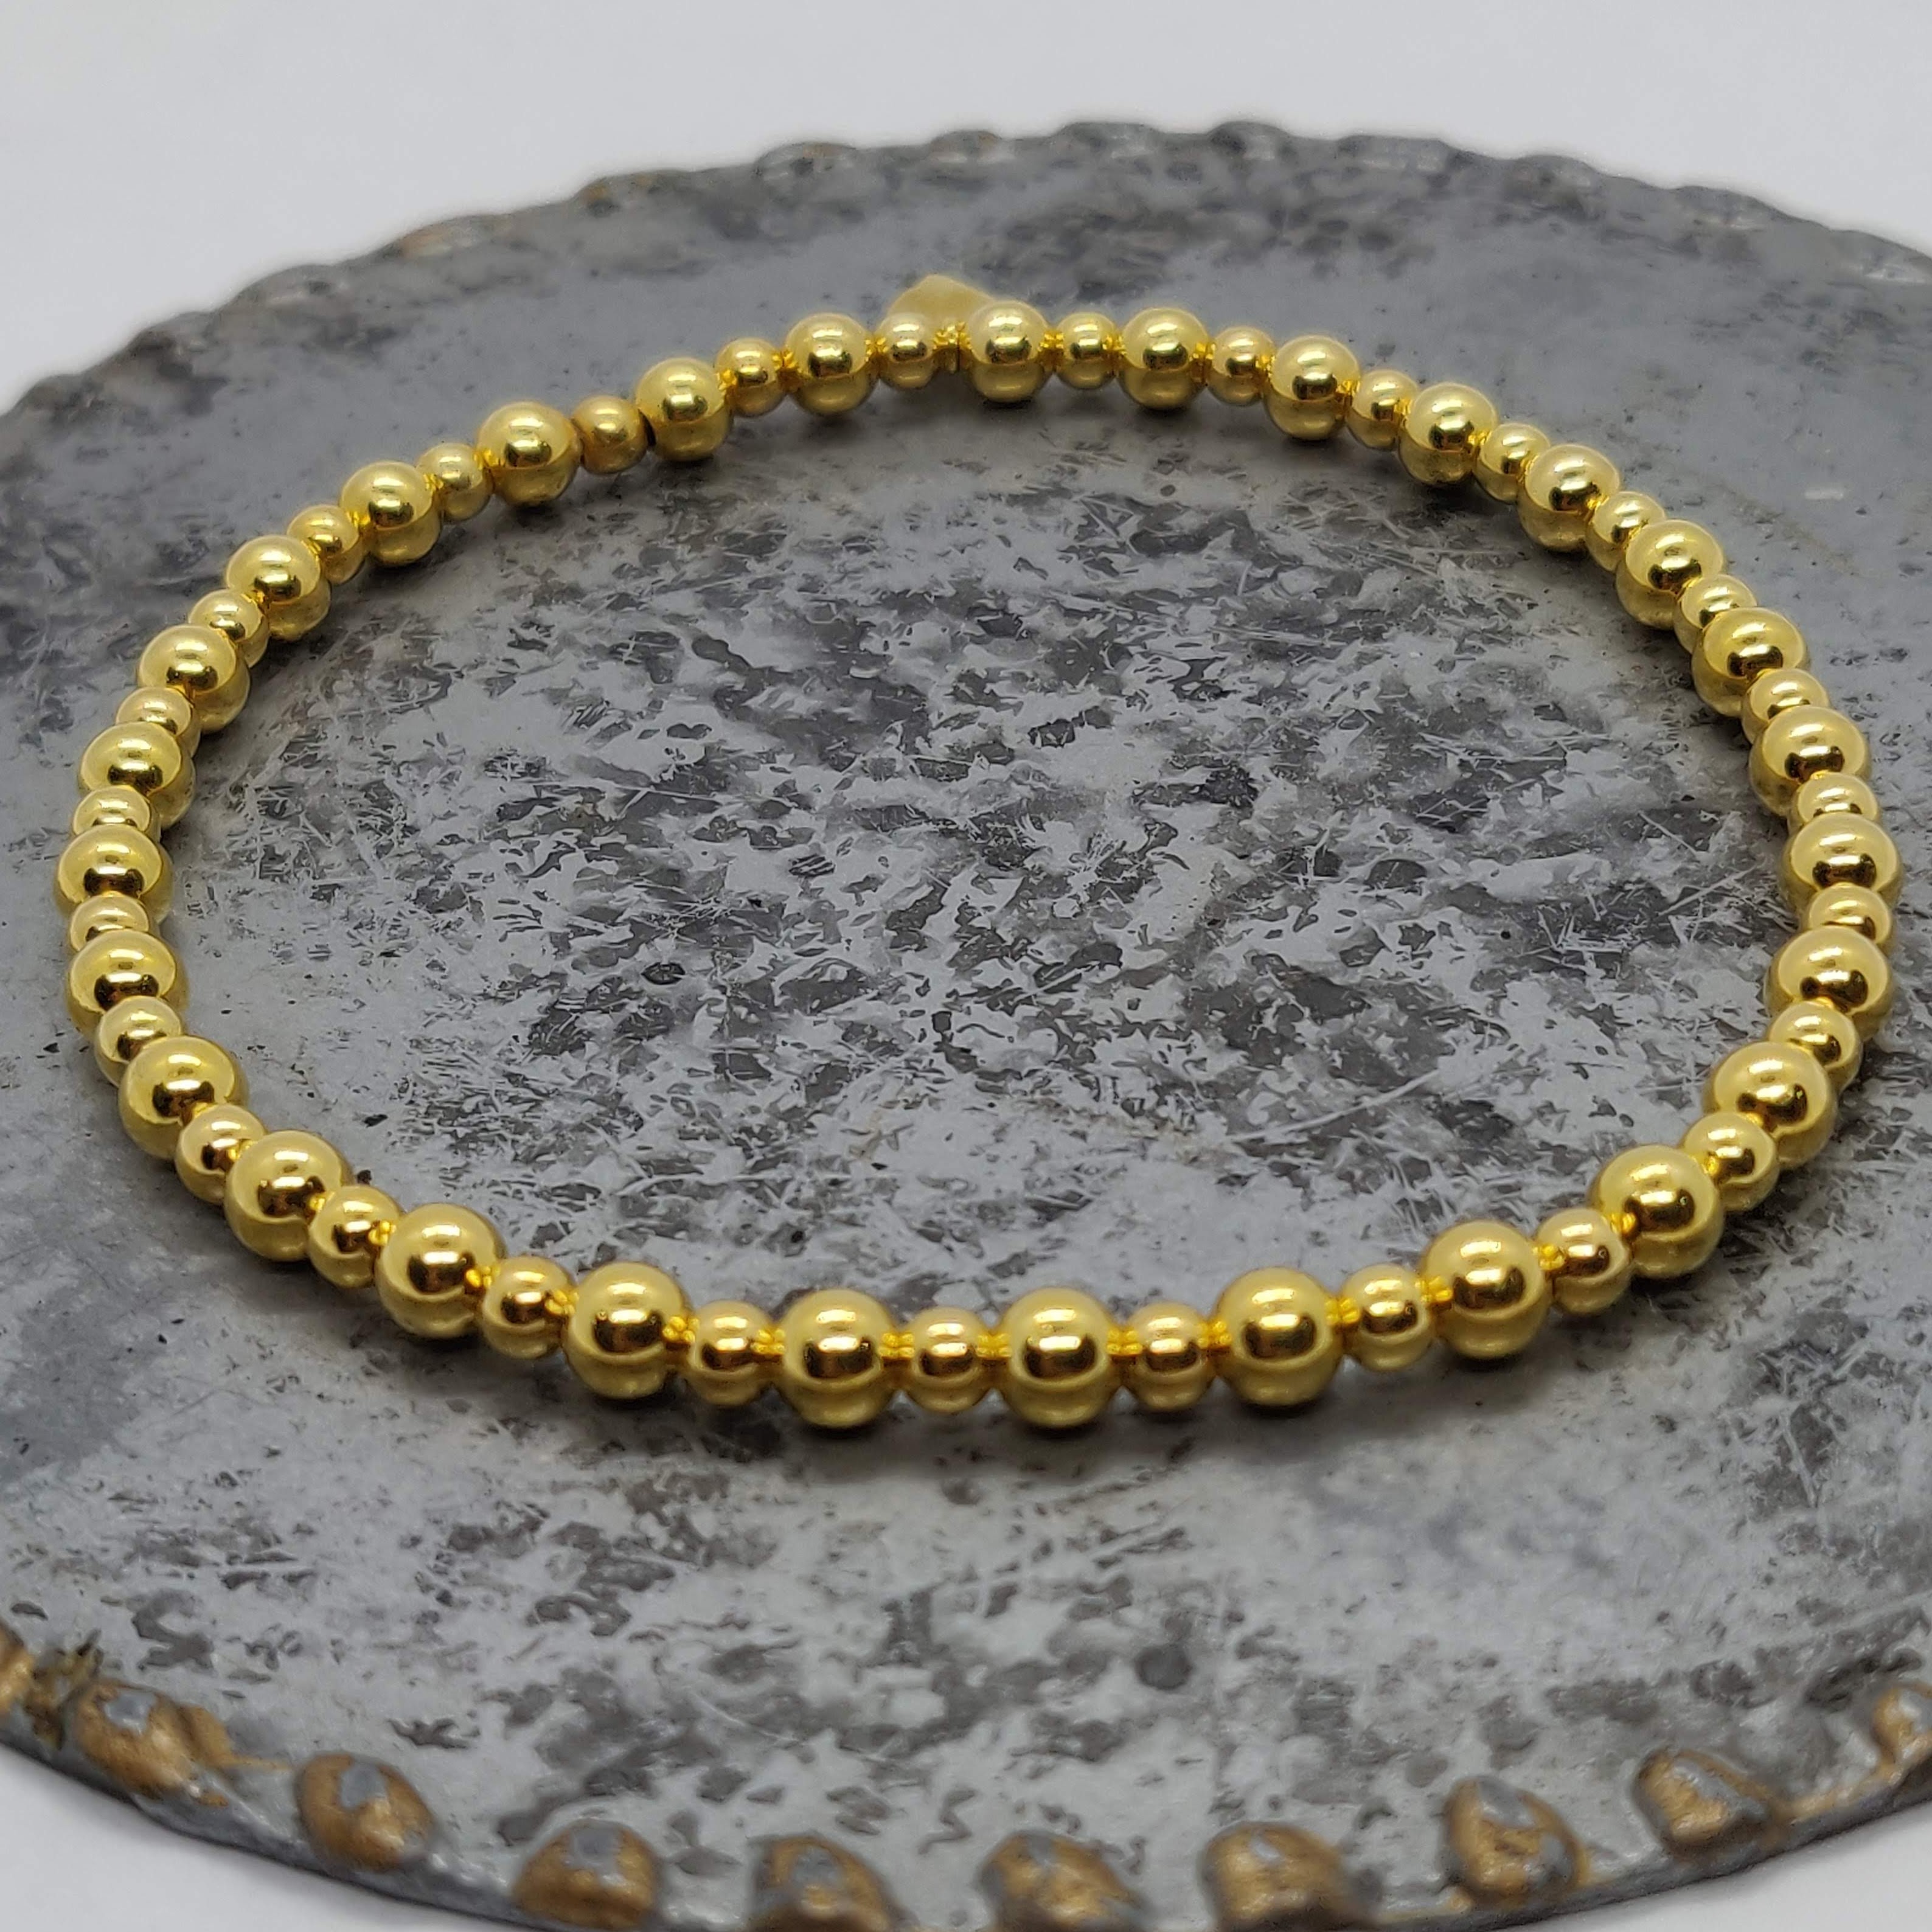 Minimal design. Maximum impact. 14k Gold filled beaded bracelet with 3 -  Down Syndrome Boutique